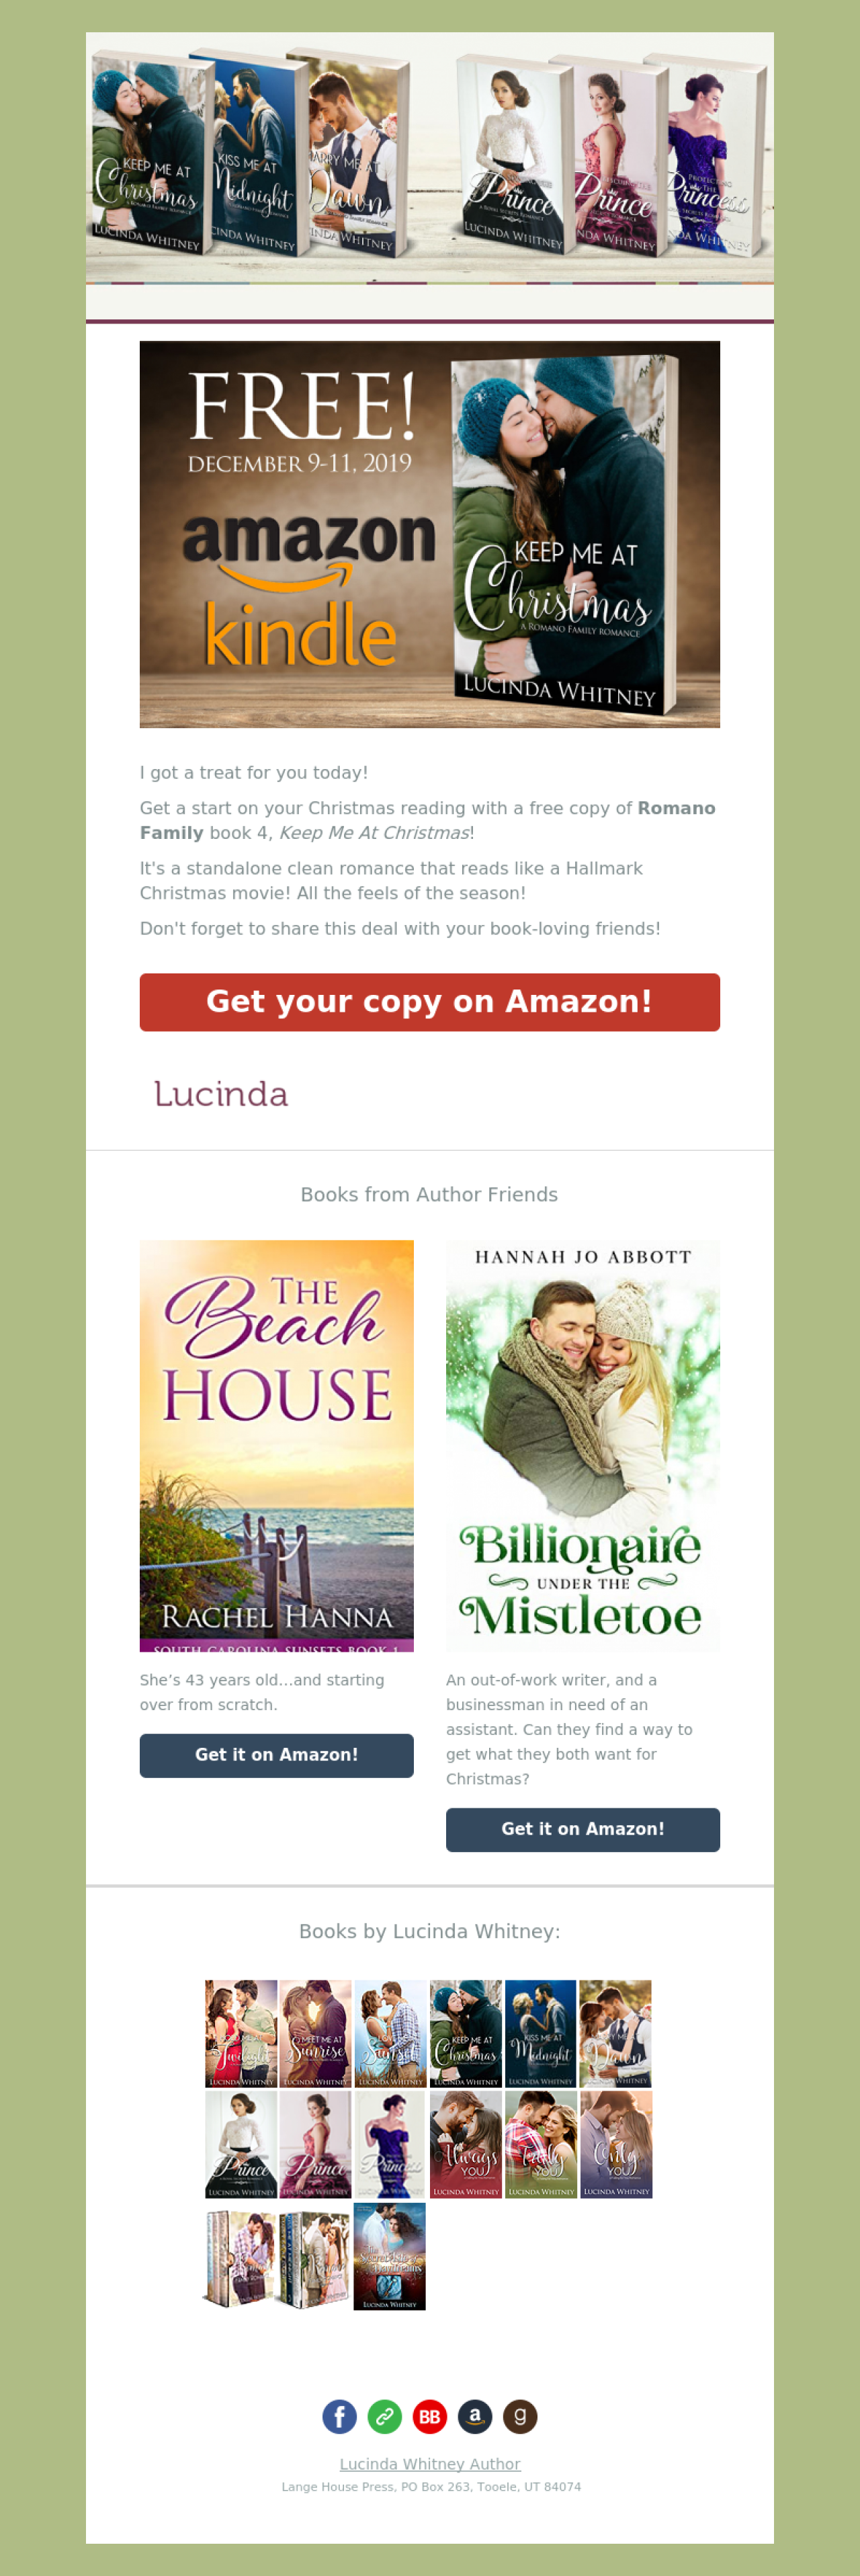 Lucinda Whitney Author example - Made with MailerLite